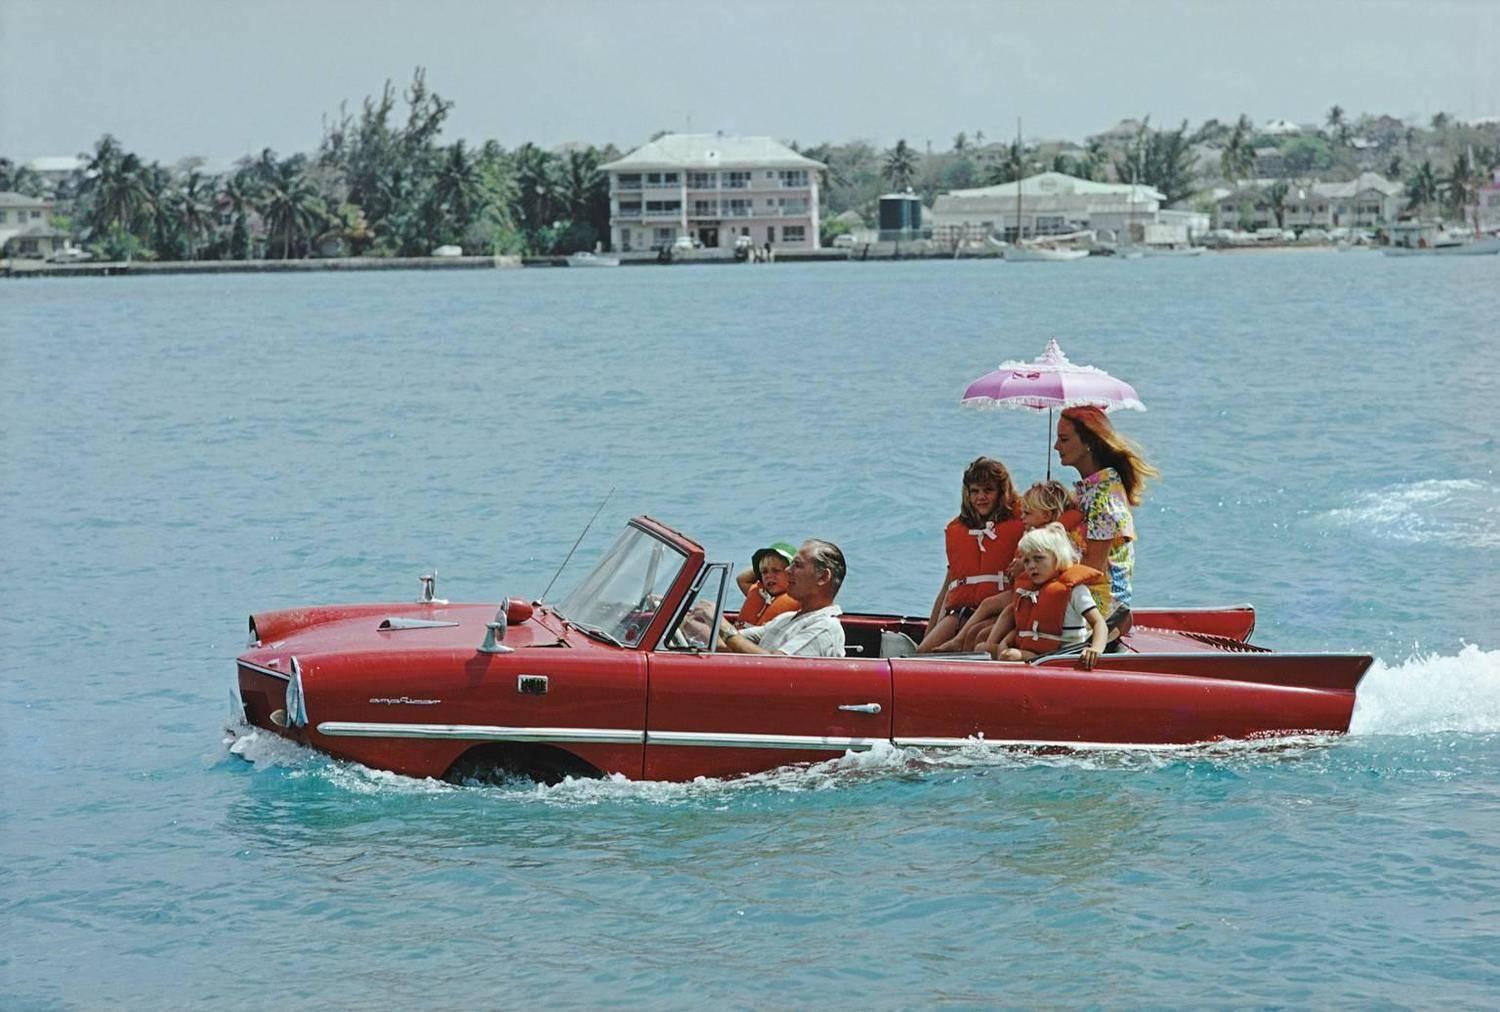 Slim Aarons
Sea Drive, 1967
40 x 60 inches
Chromogenic Lambda print
Estate stamped and hand numbered edition of 150 with certificate of authenticity. 

Film producer Kevin McClory takes his wife Bobo Segrist and their family for a drive in an